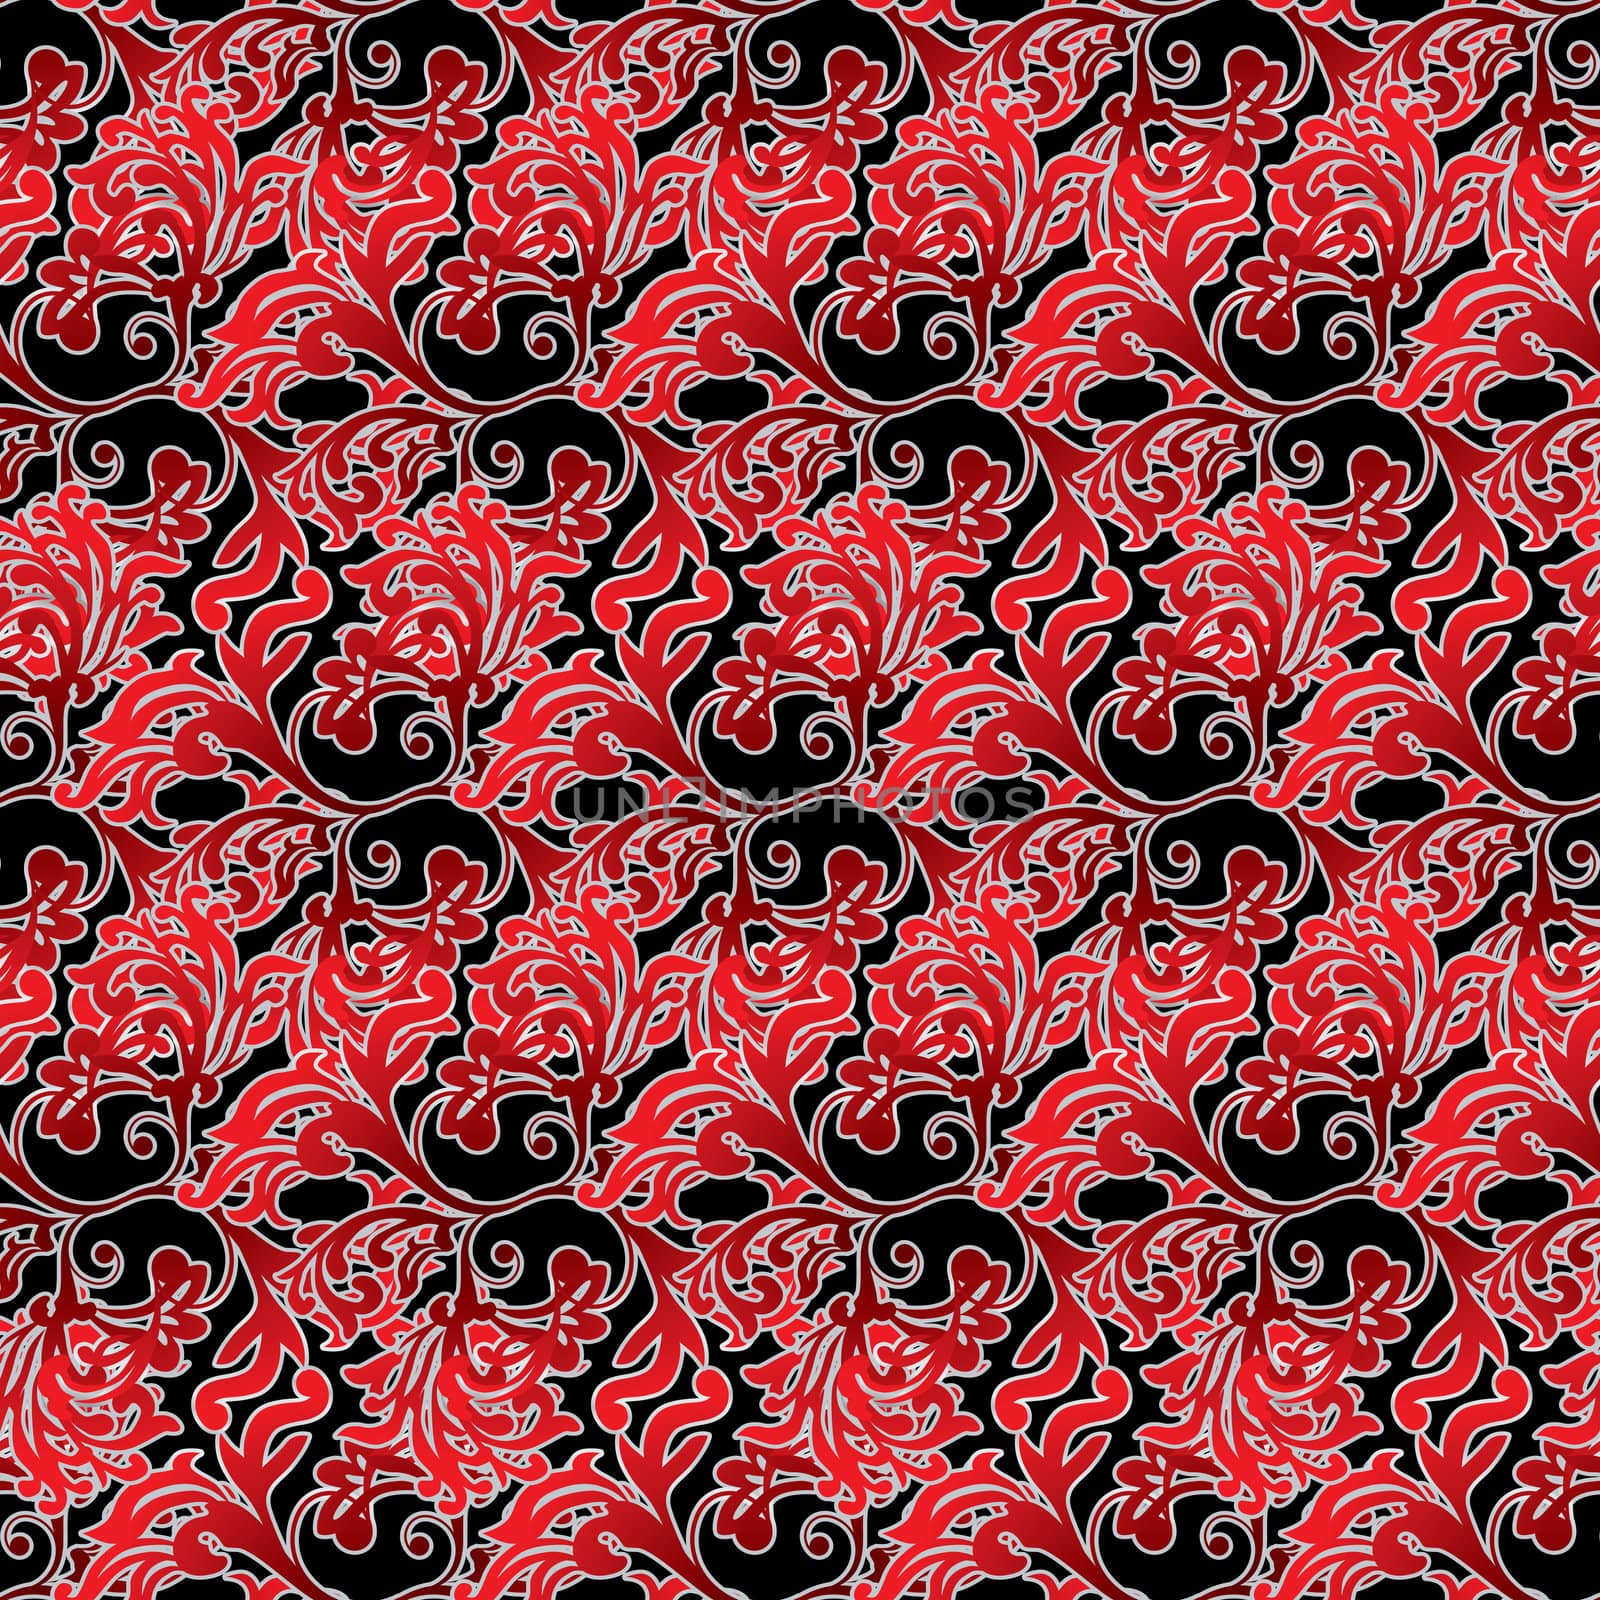 floral inspired red and black background that seamlessly repeats